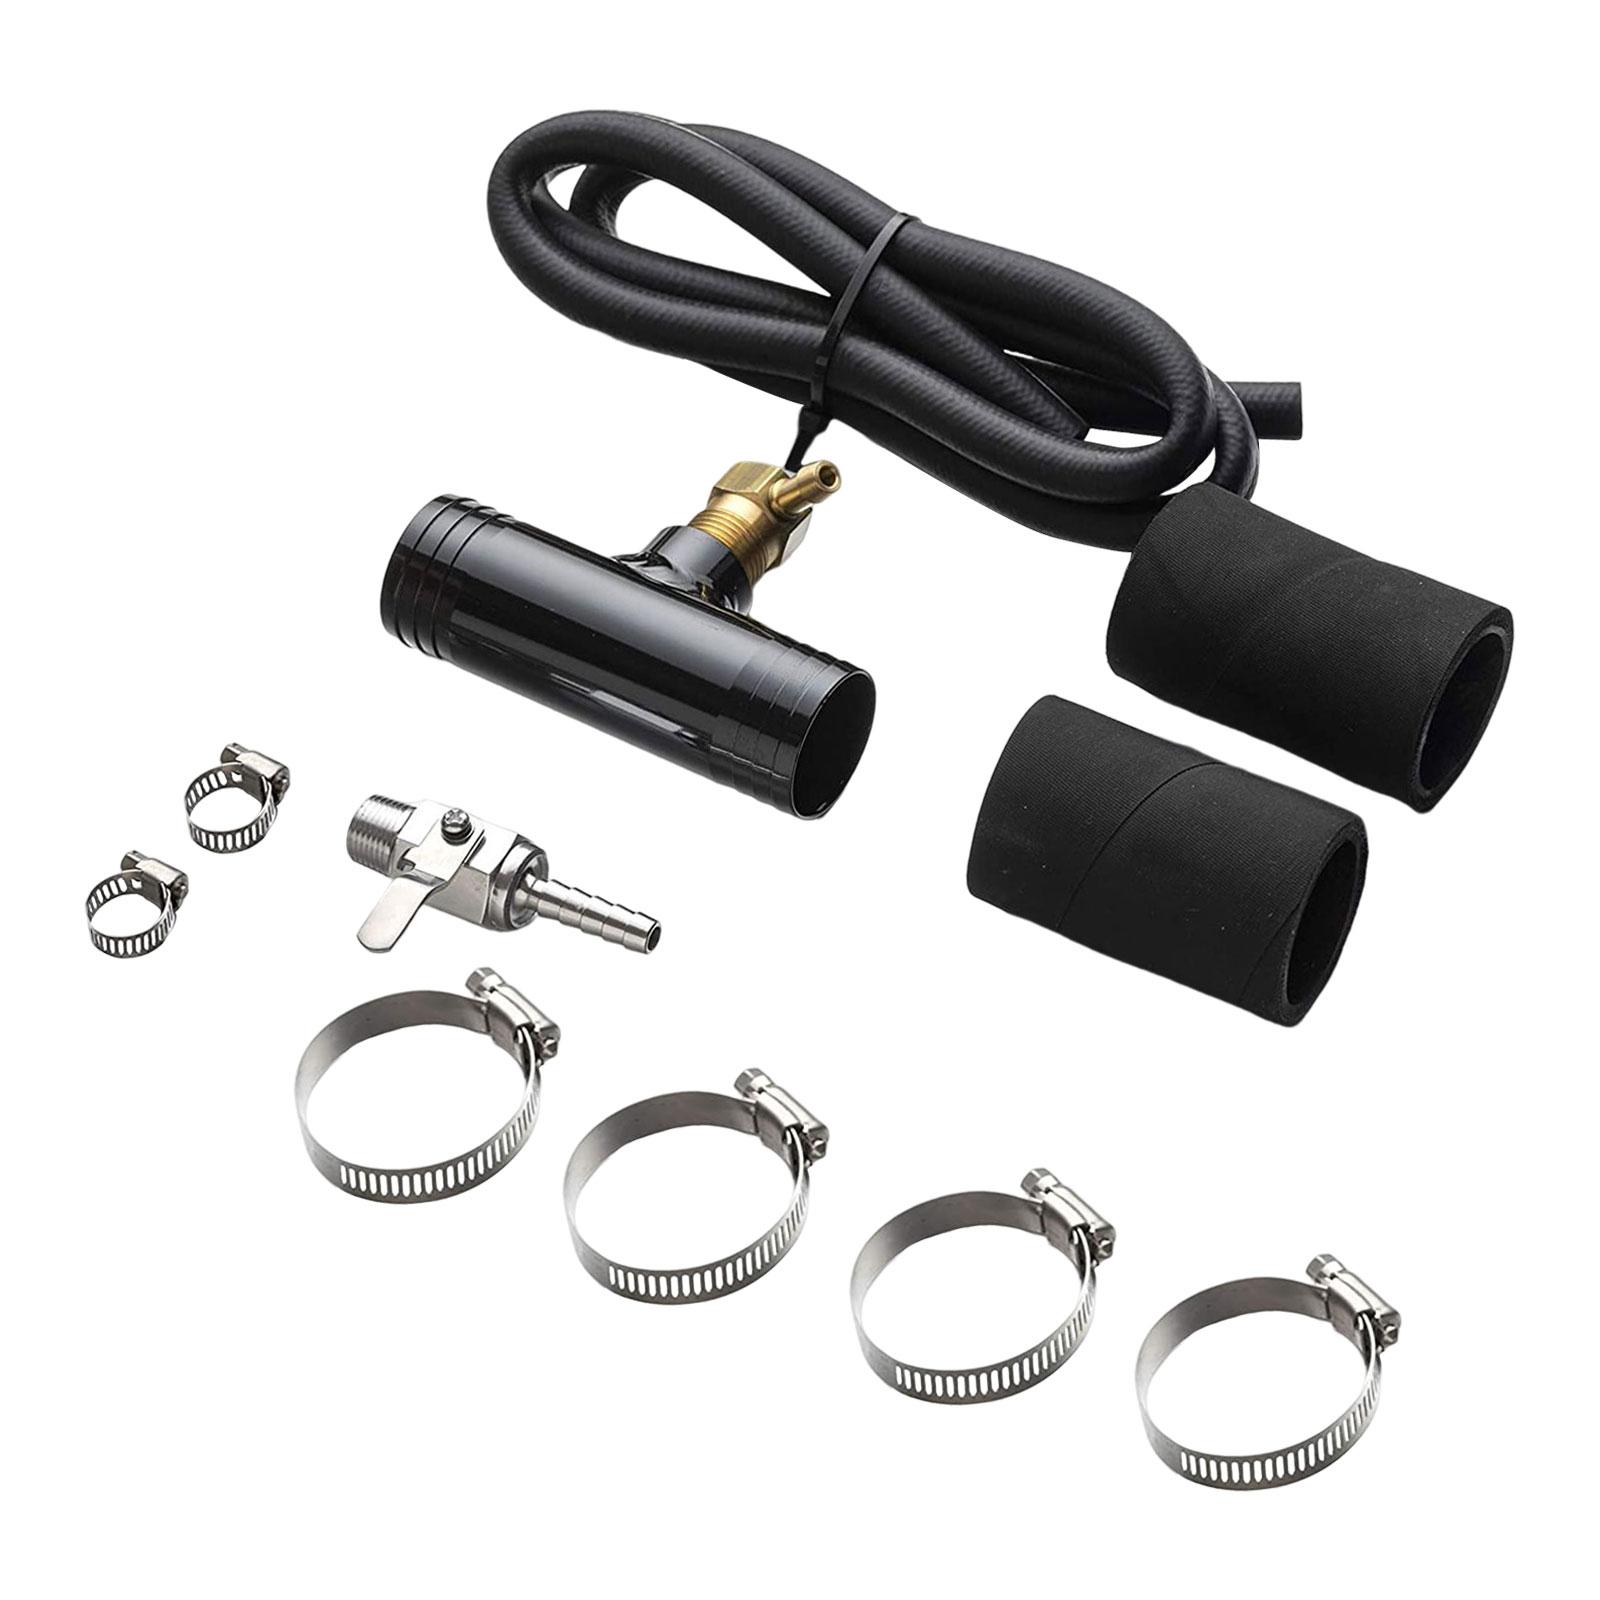 Auxiliary Fuel Tank Install Kit 11408 1 3/4" for Dodge Replacement